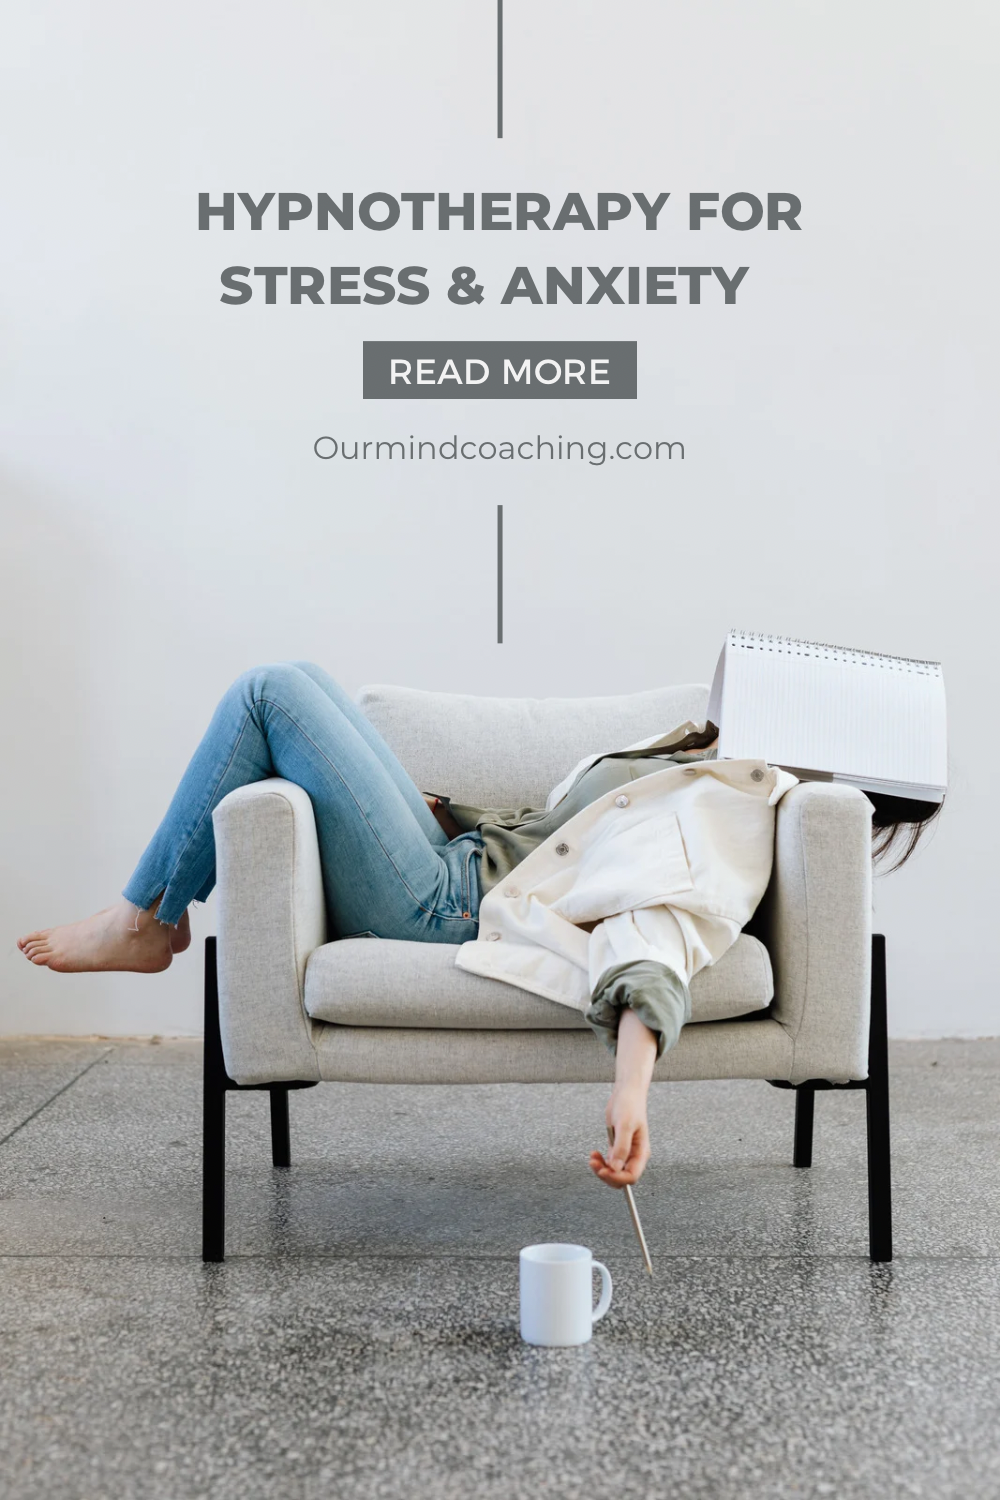 Hypnotherapy for Anxiety and Stress